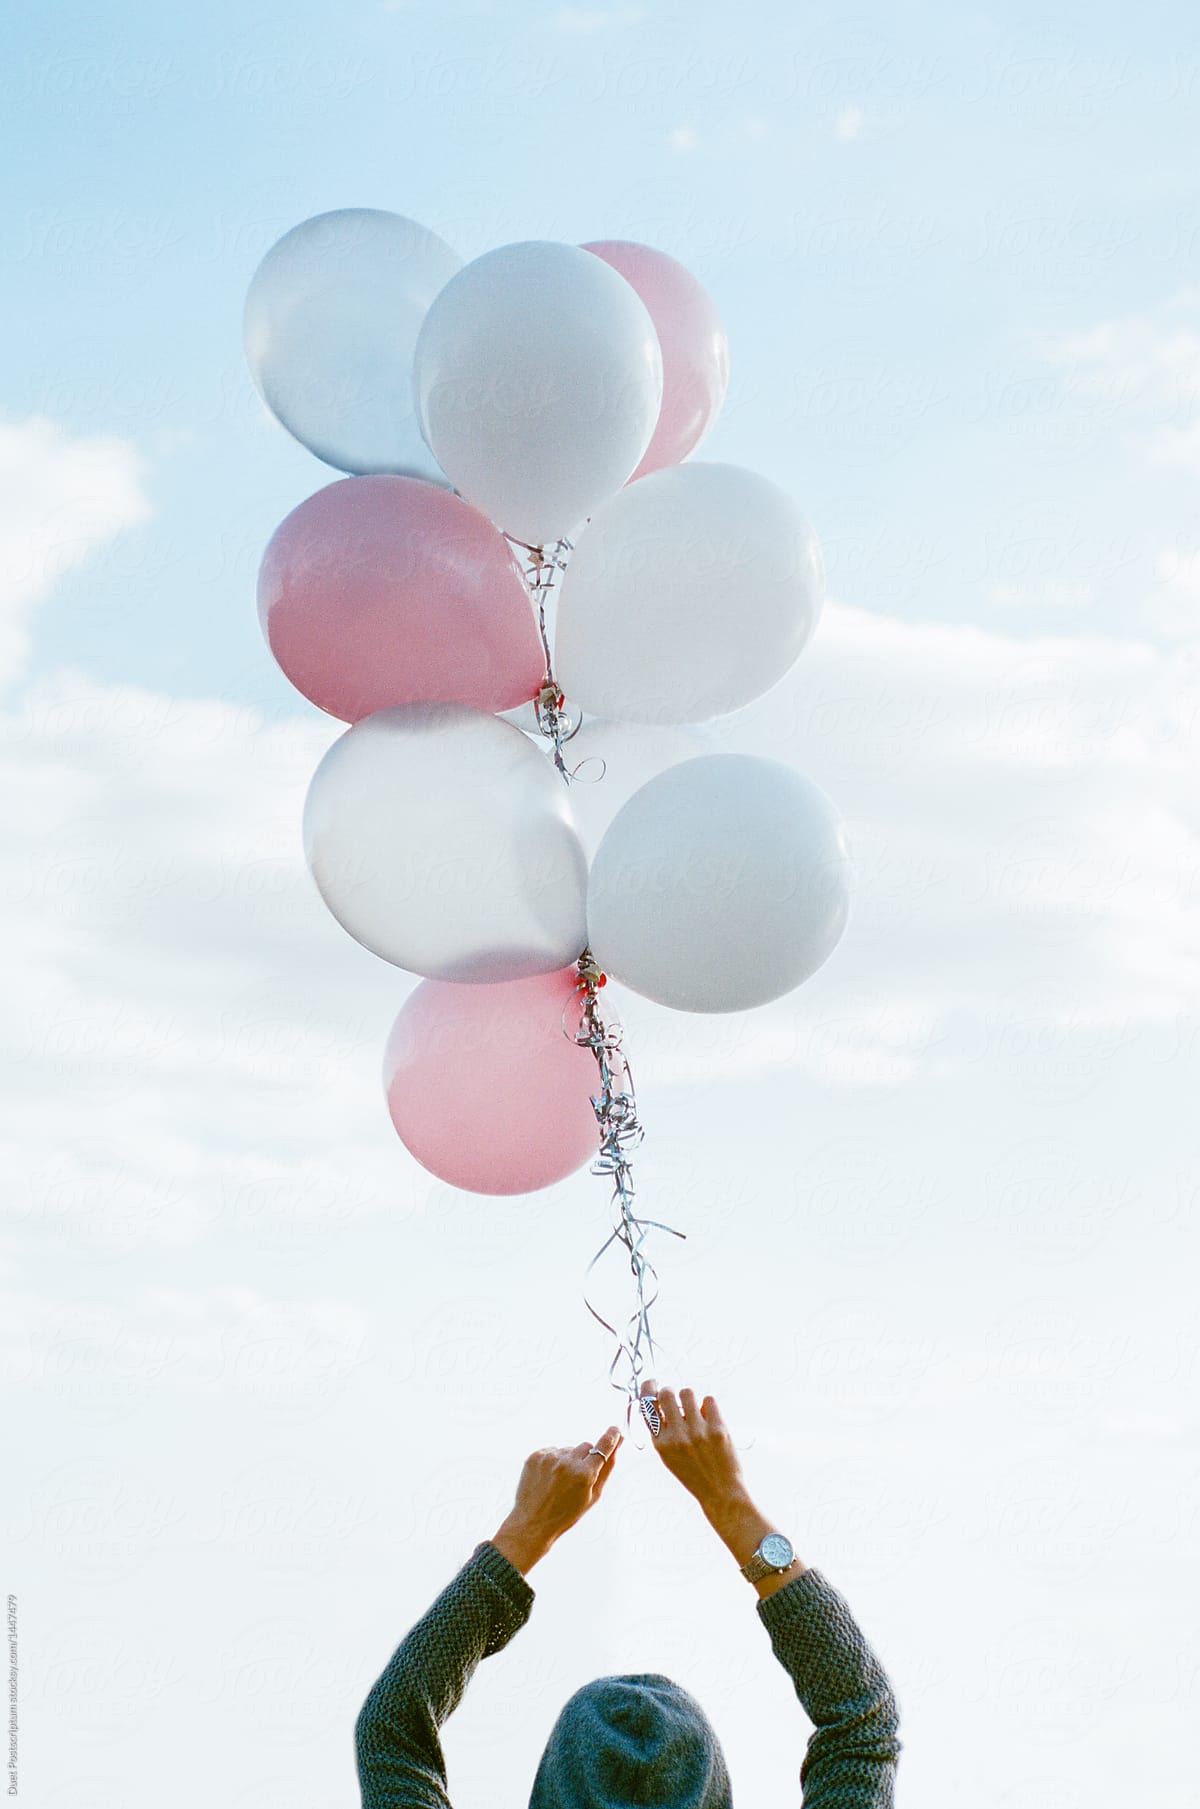 Person holding balloons high